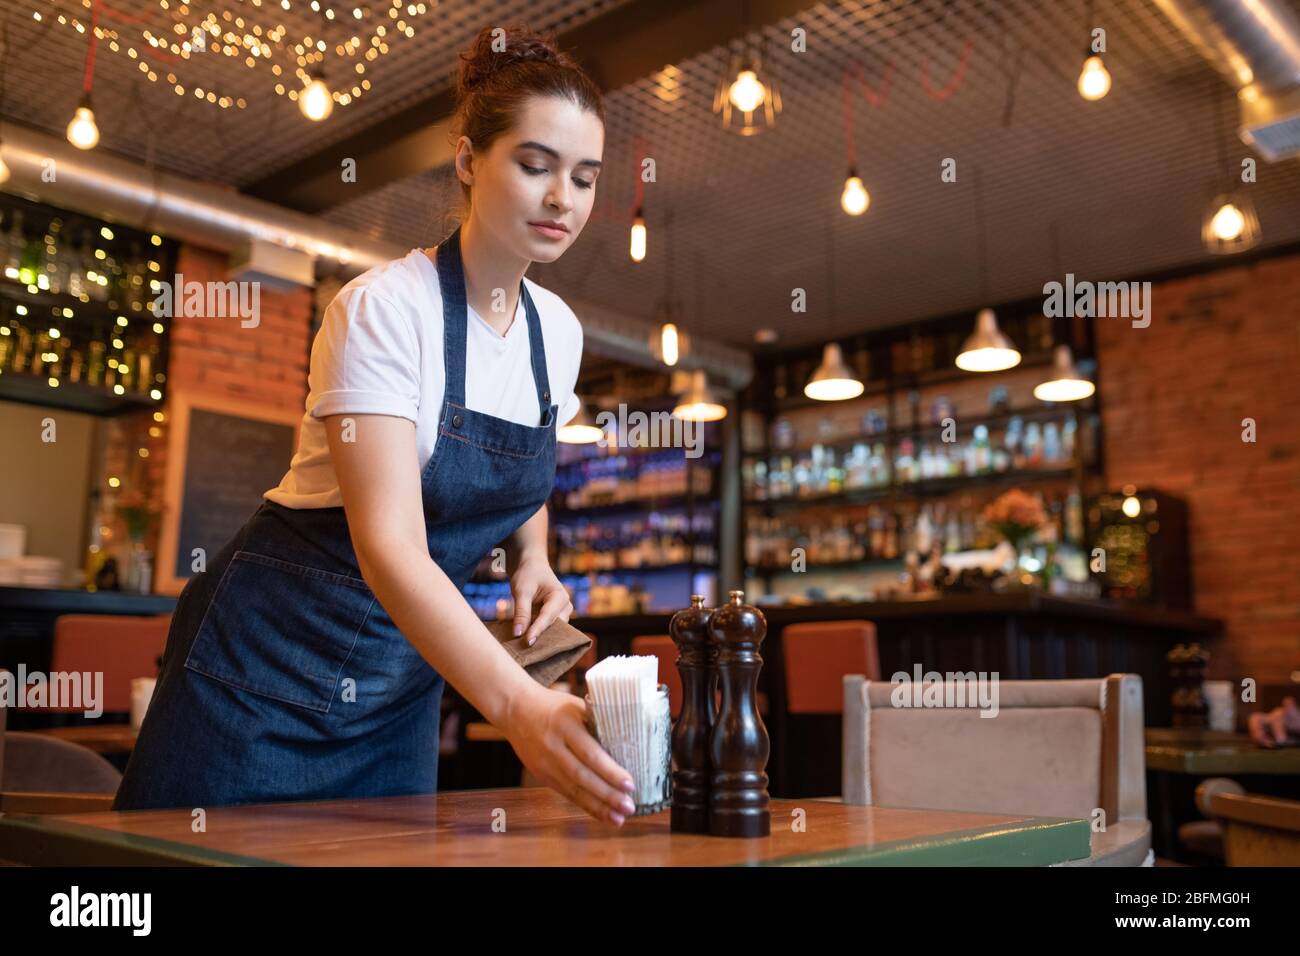 Young waitress of classy restaurant putting glass with bunch of toothpicks, salt and pepper on one of tables while preparing it for guests Stock Photo